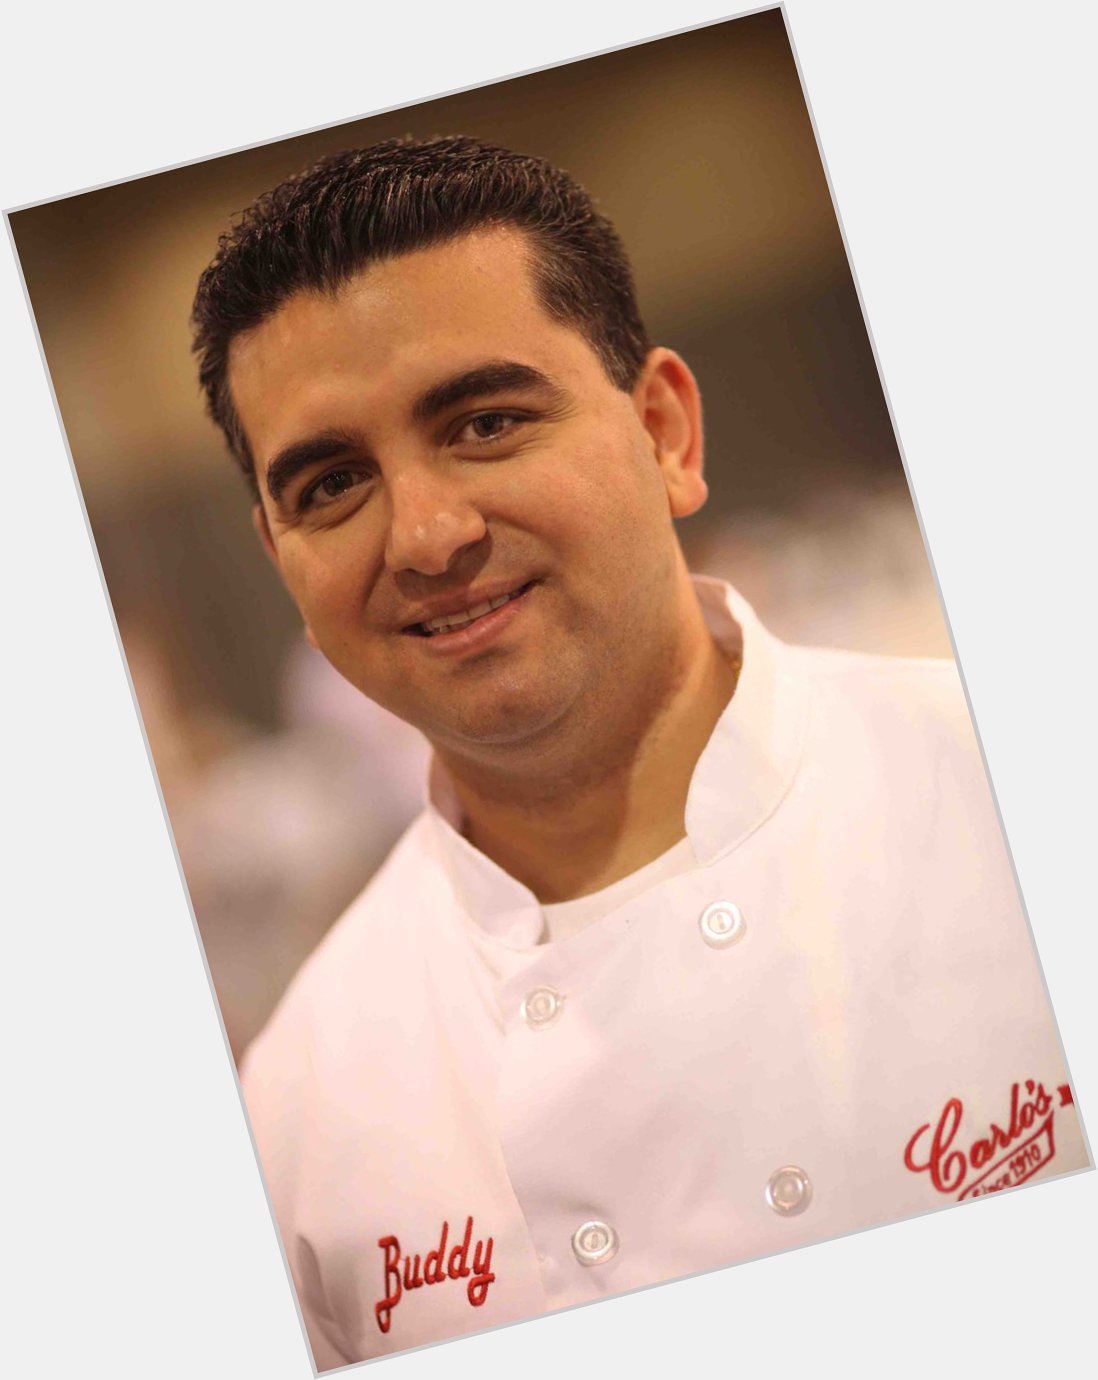 Happy birthday to the most amazing chef buddy valastro! he\s the ultimate cake boss!  